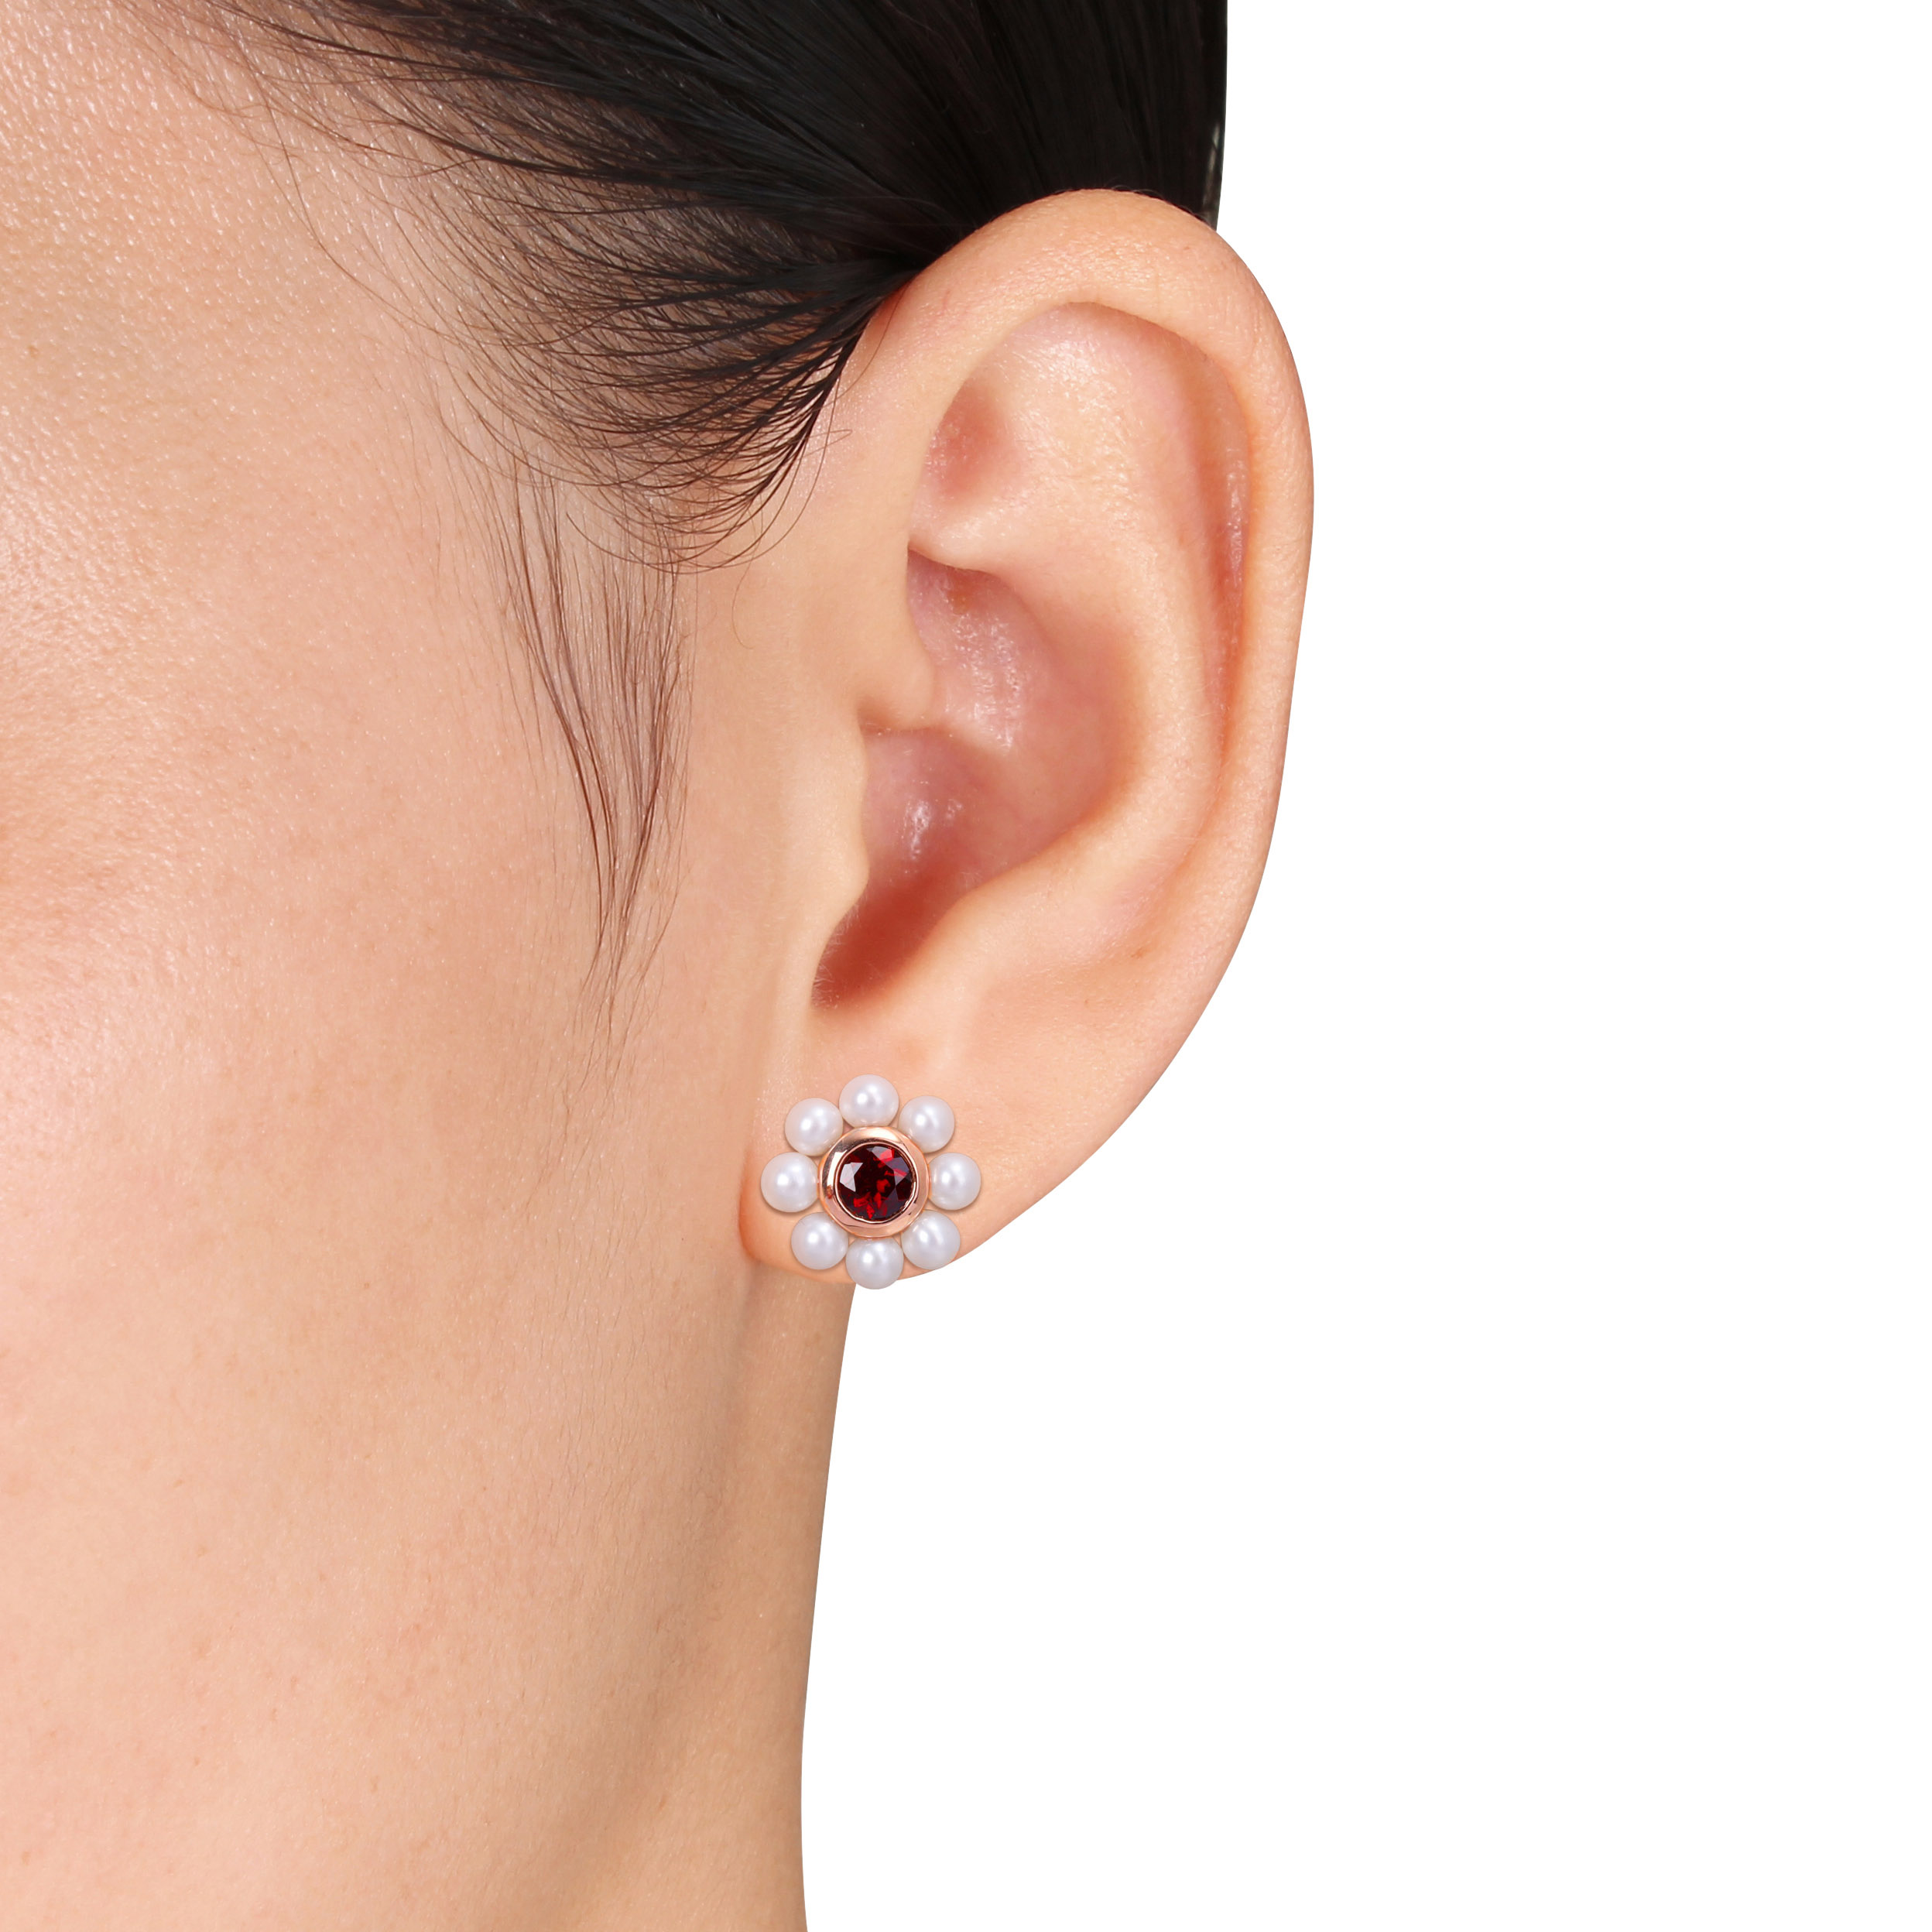 3.5-4 MM Freshwater Cultured Pearl and 1 1/5 CT TGW Garnet Floral Stud Earrings in 10k Rose Gold